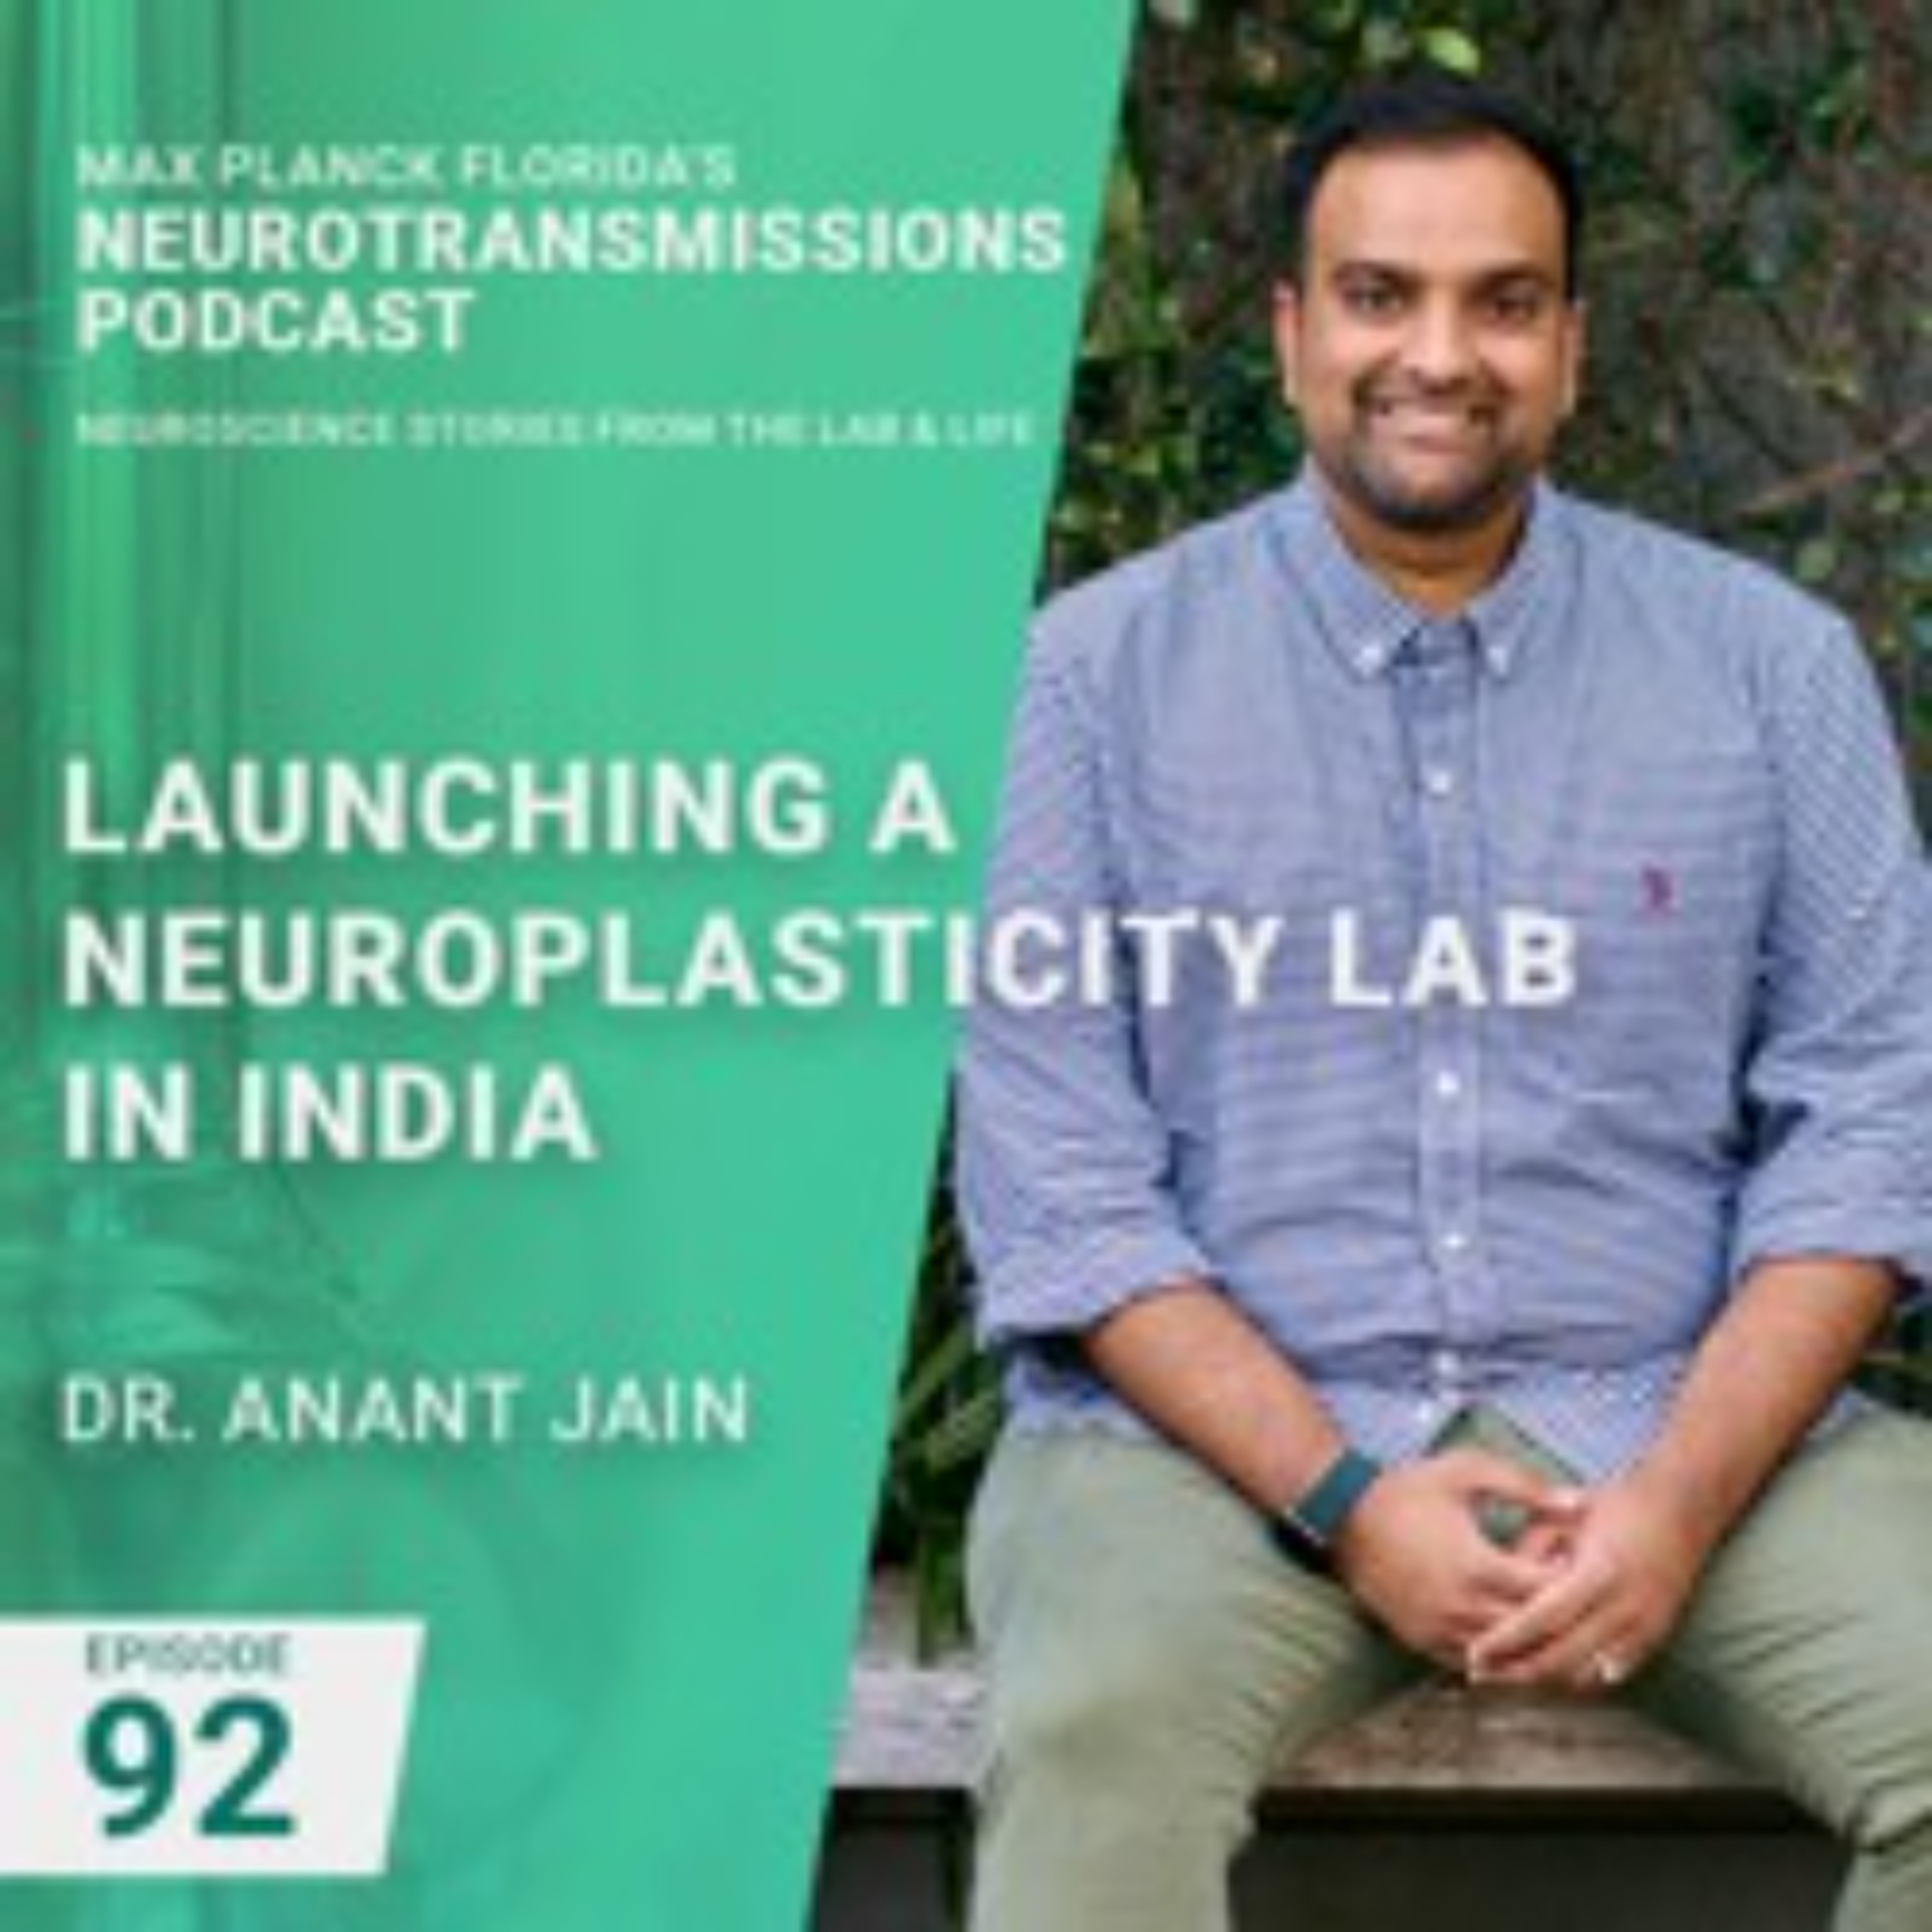 92. Launching a Neuroplasticity Lab in India with Anant Jain